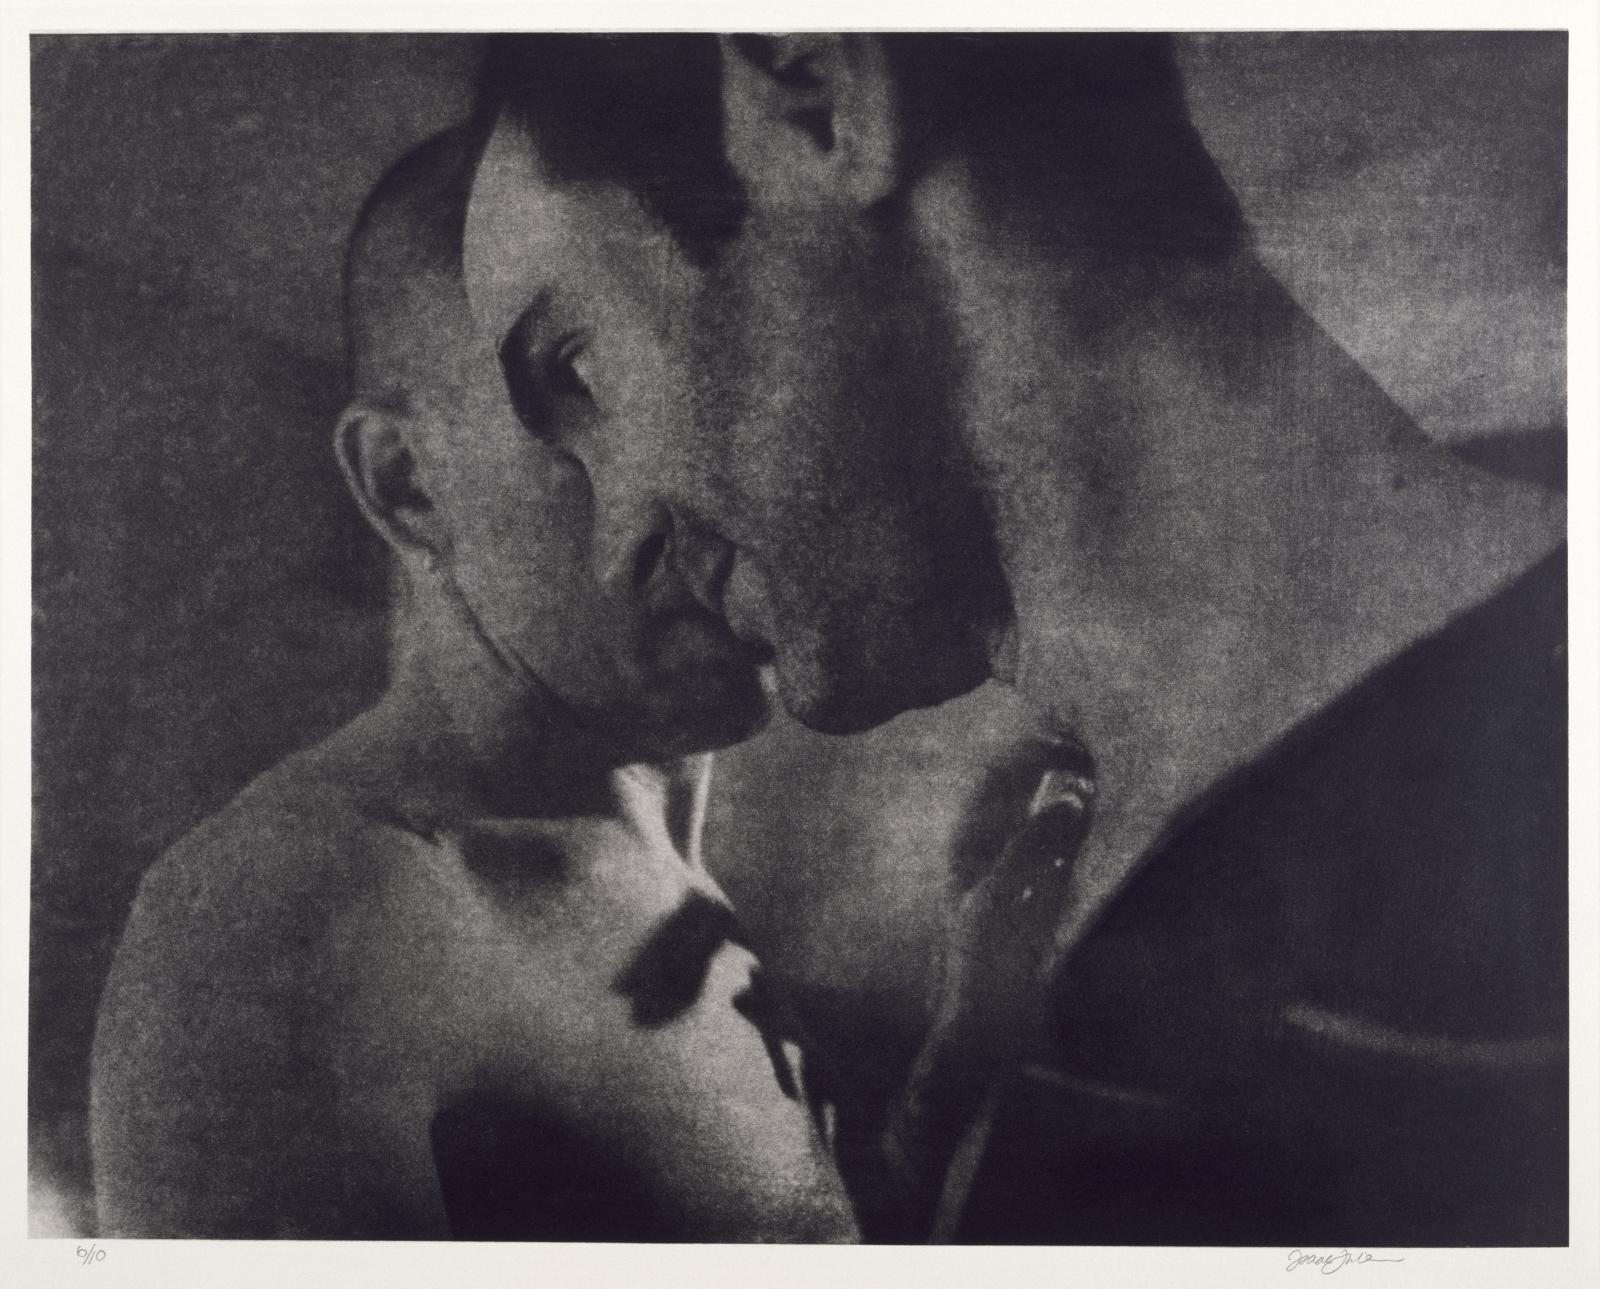 A dark image of two masculine-looking people lean in to each other as if dancing or about to kiss.